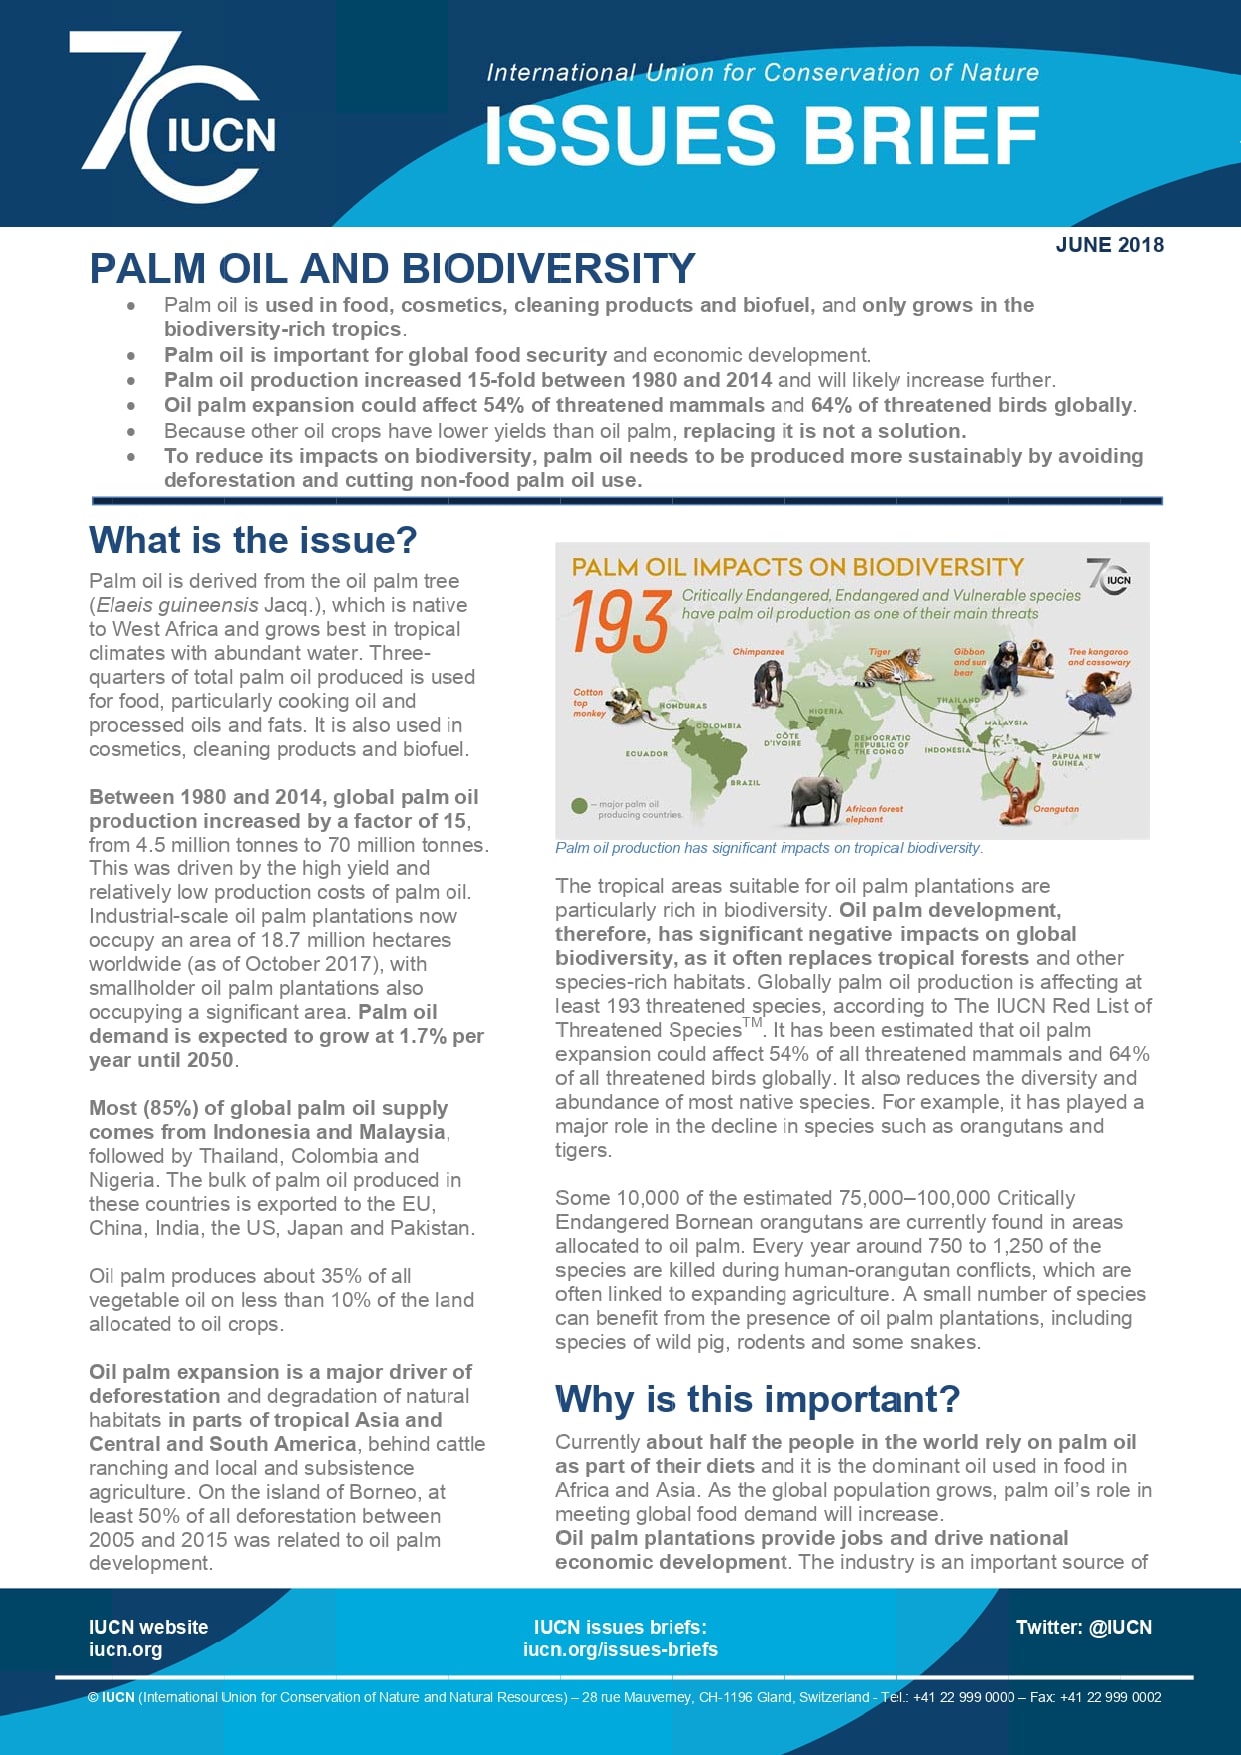 Palm oil and biodiversity